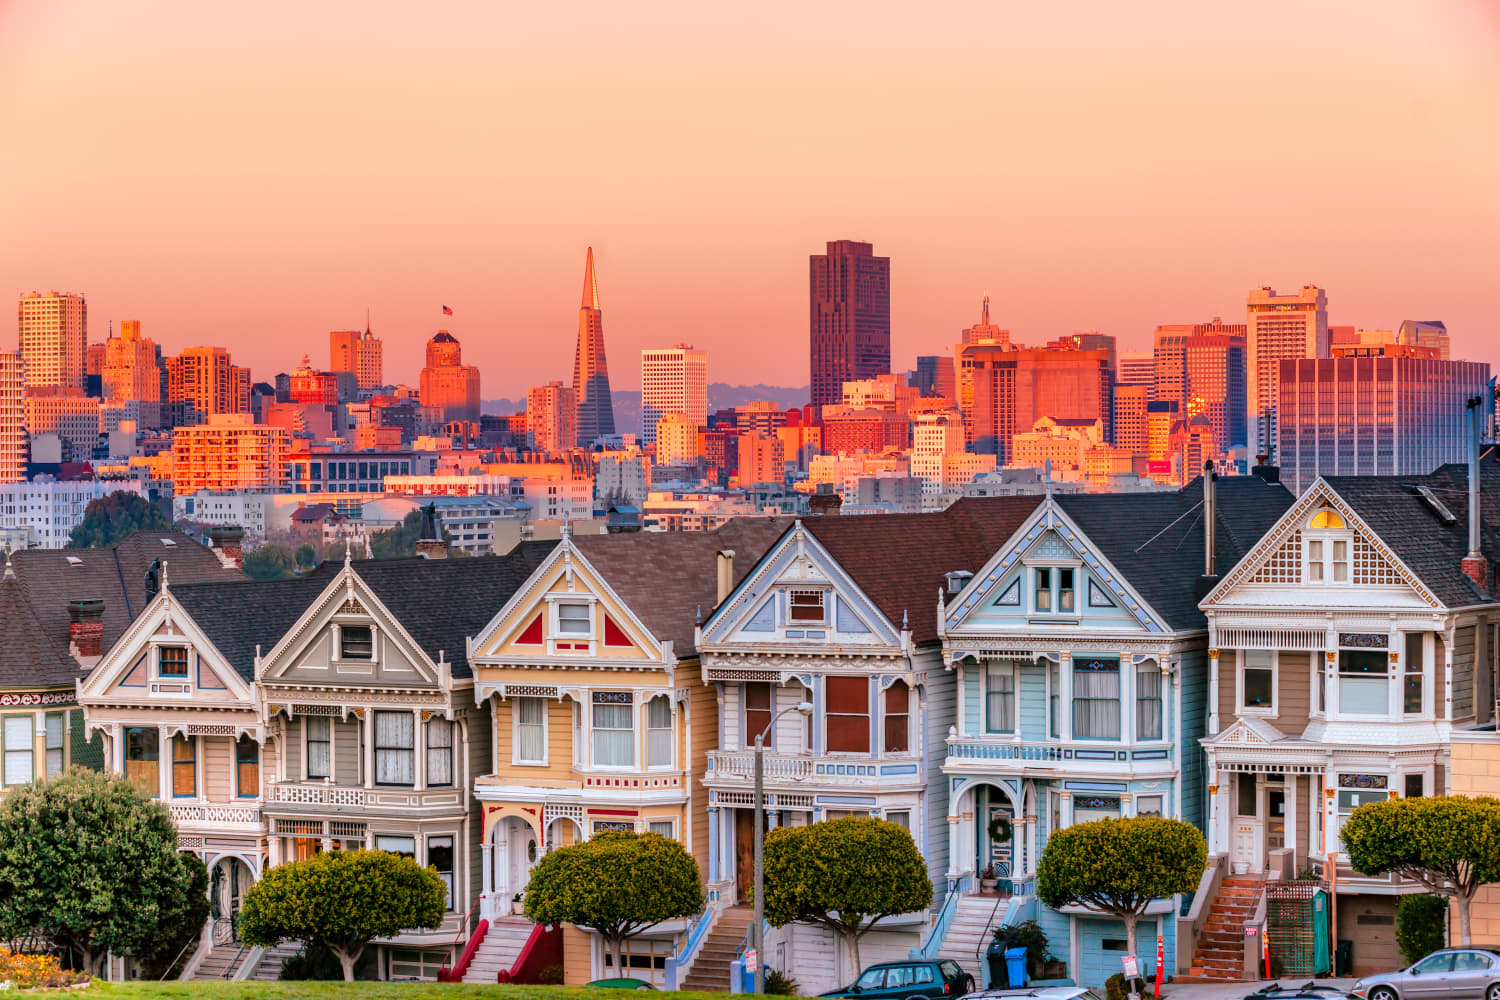 Have Mercy! The “Full House” Home Is On Sale